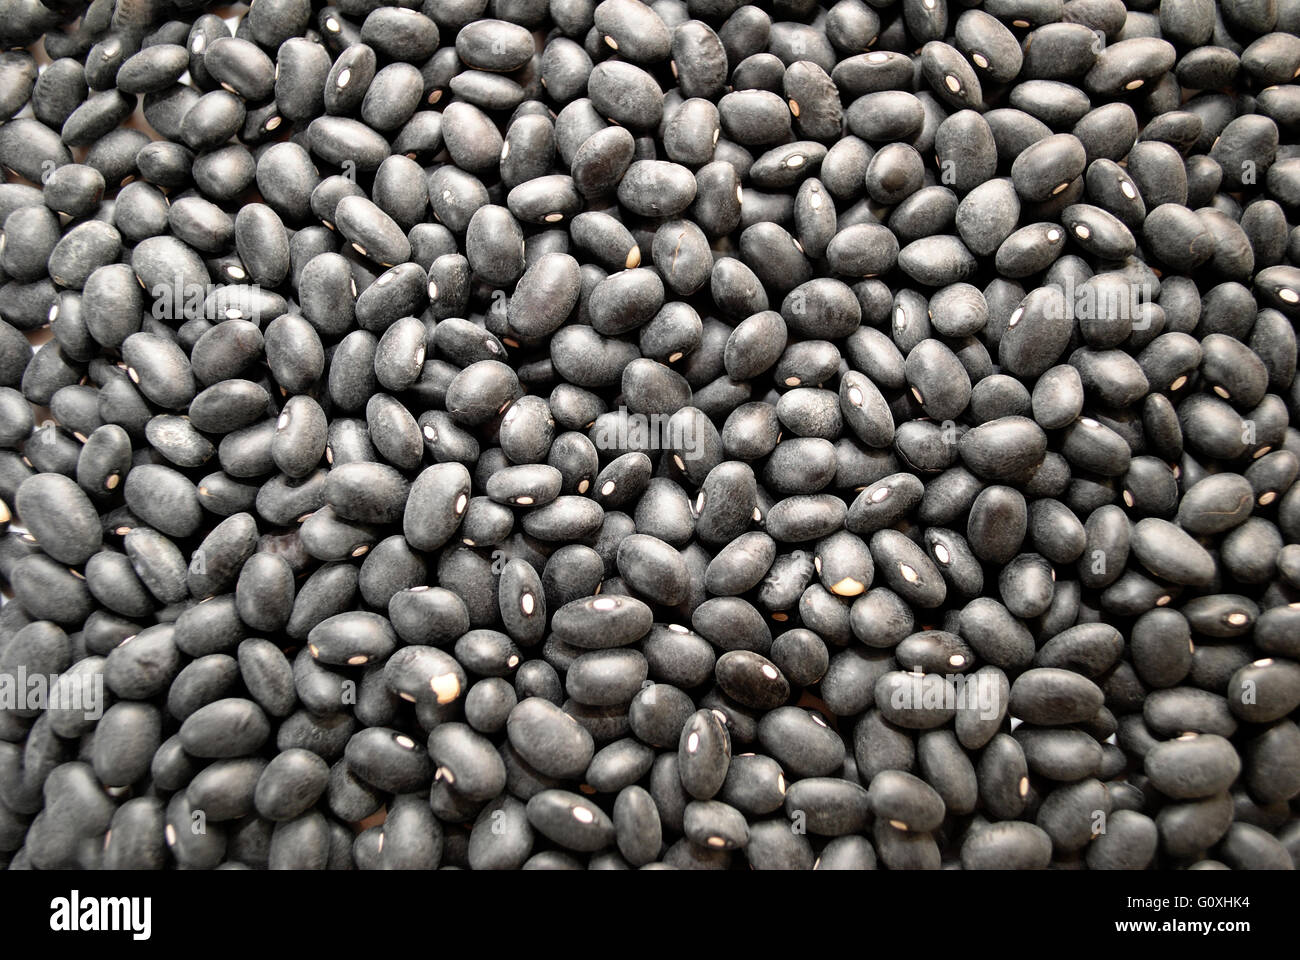 Background of Black Dried Beans Stock Photo